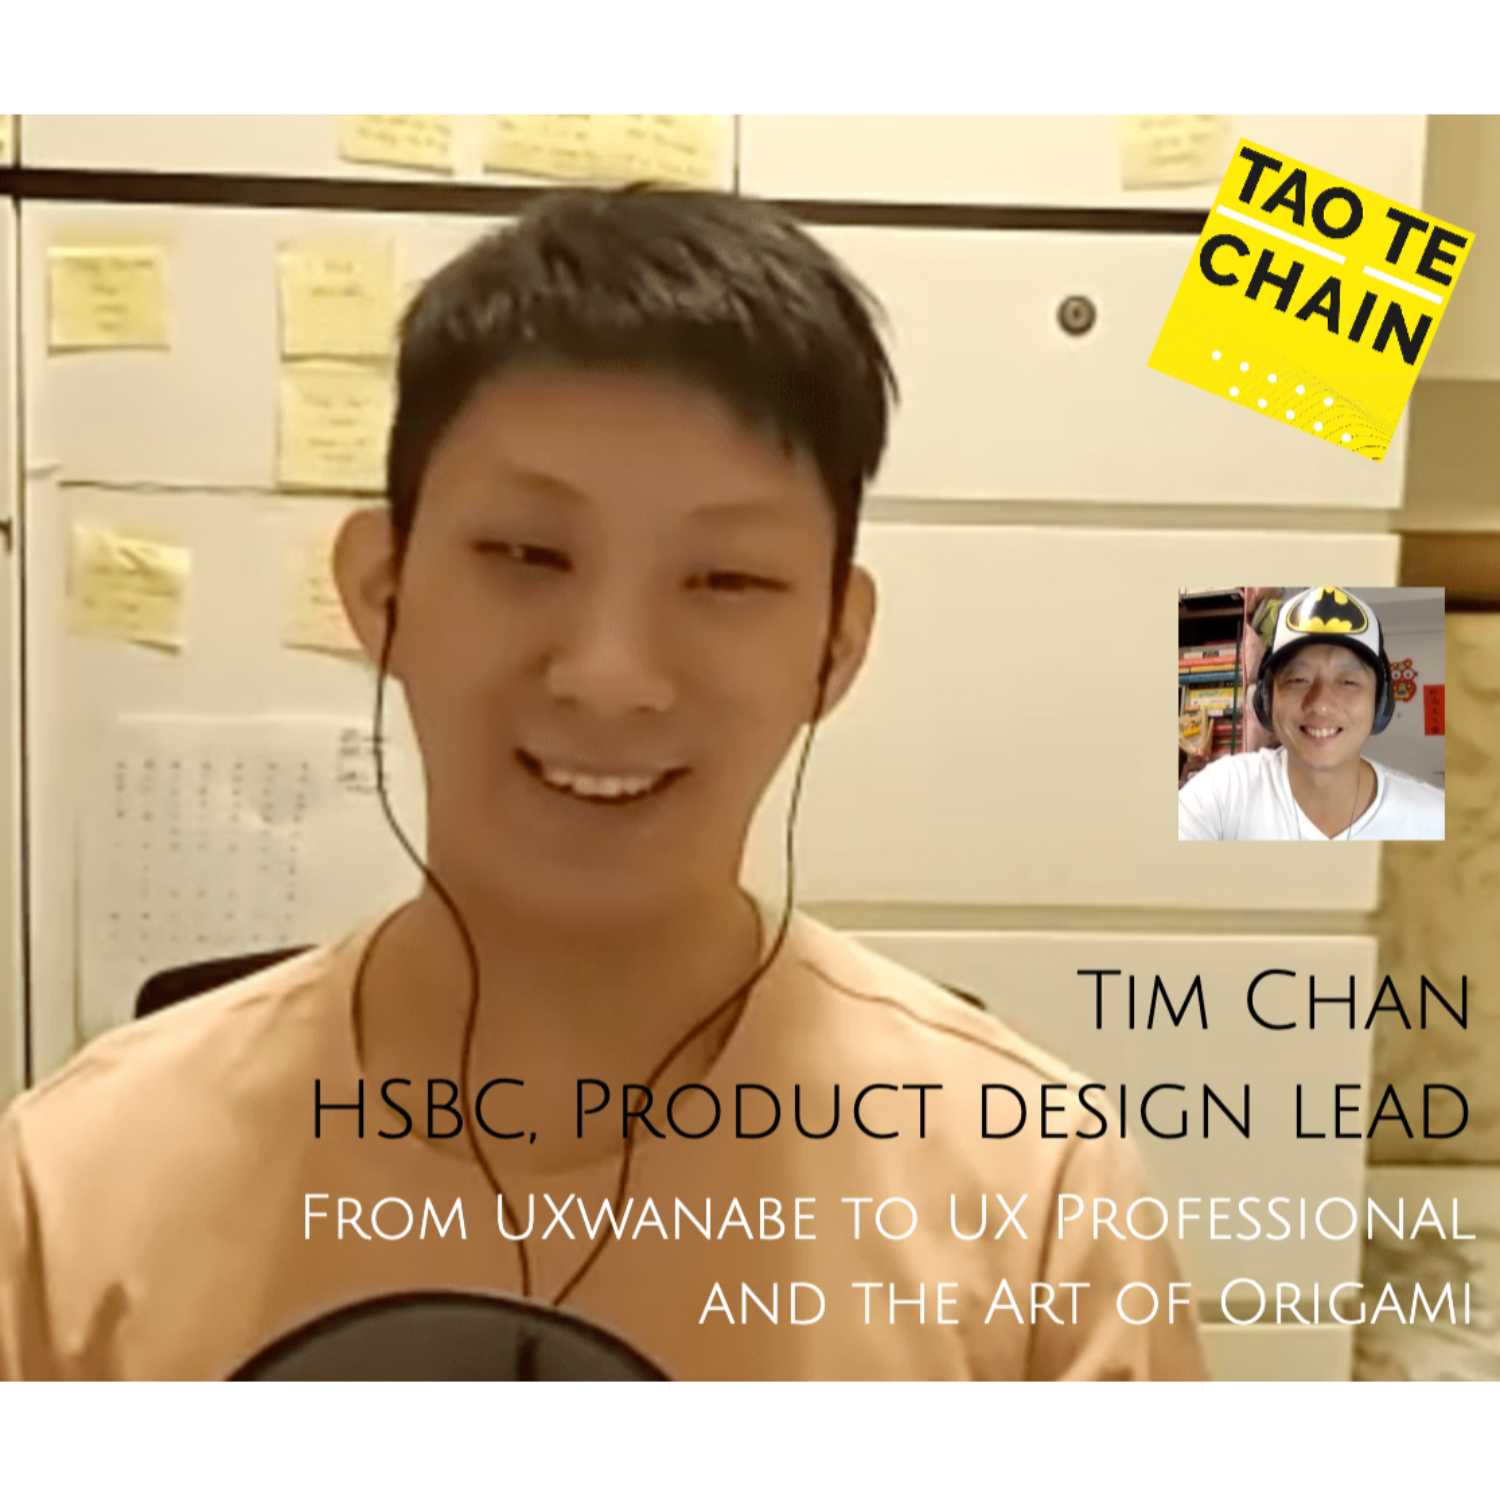 Tim Chan - From UXwanabe to UX Professional, and the Art of Origami